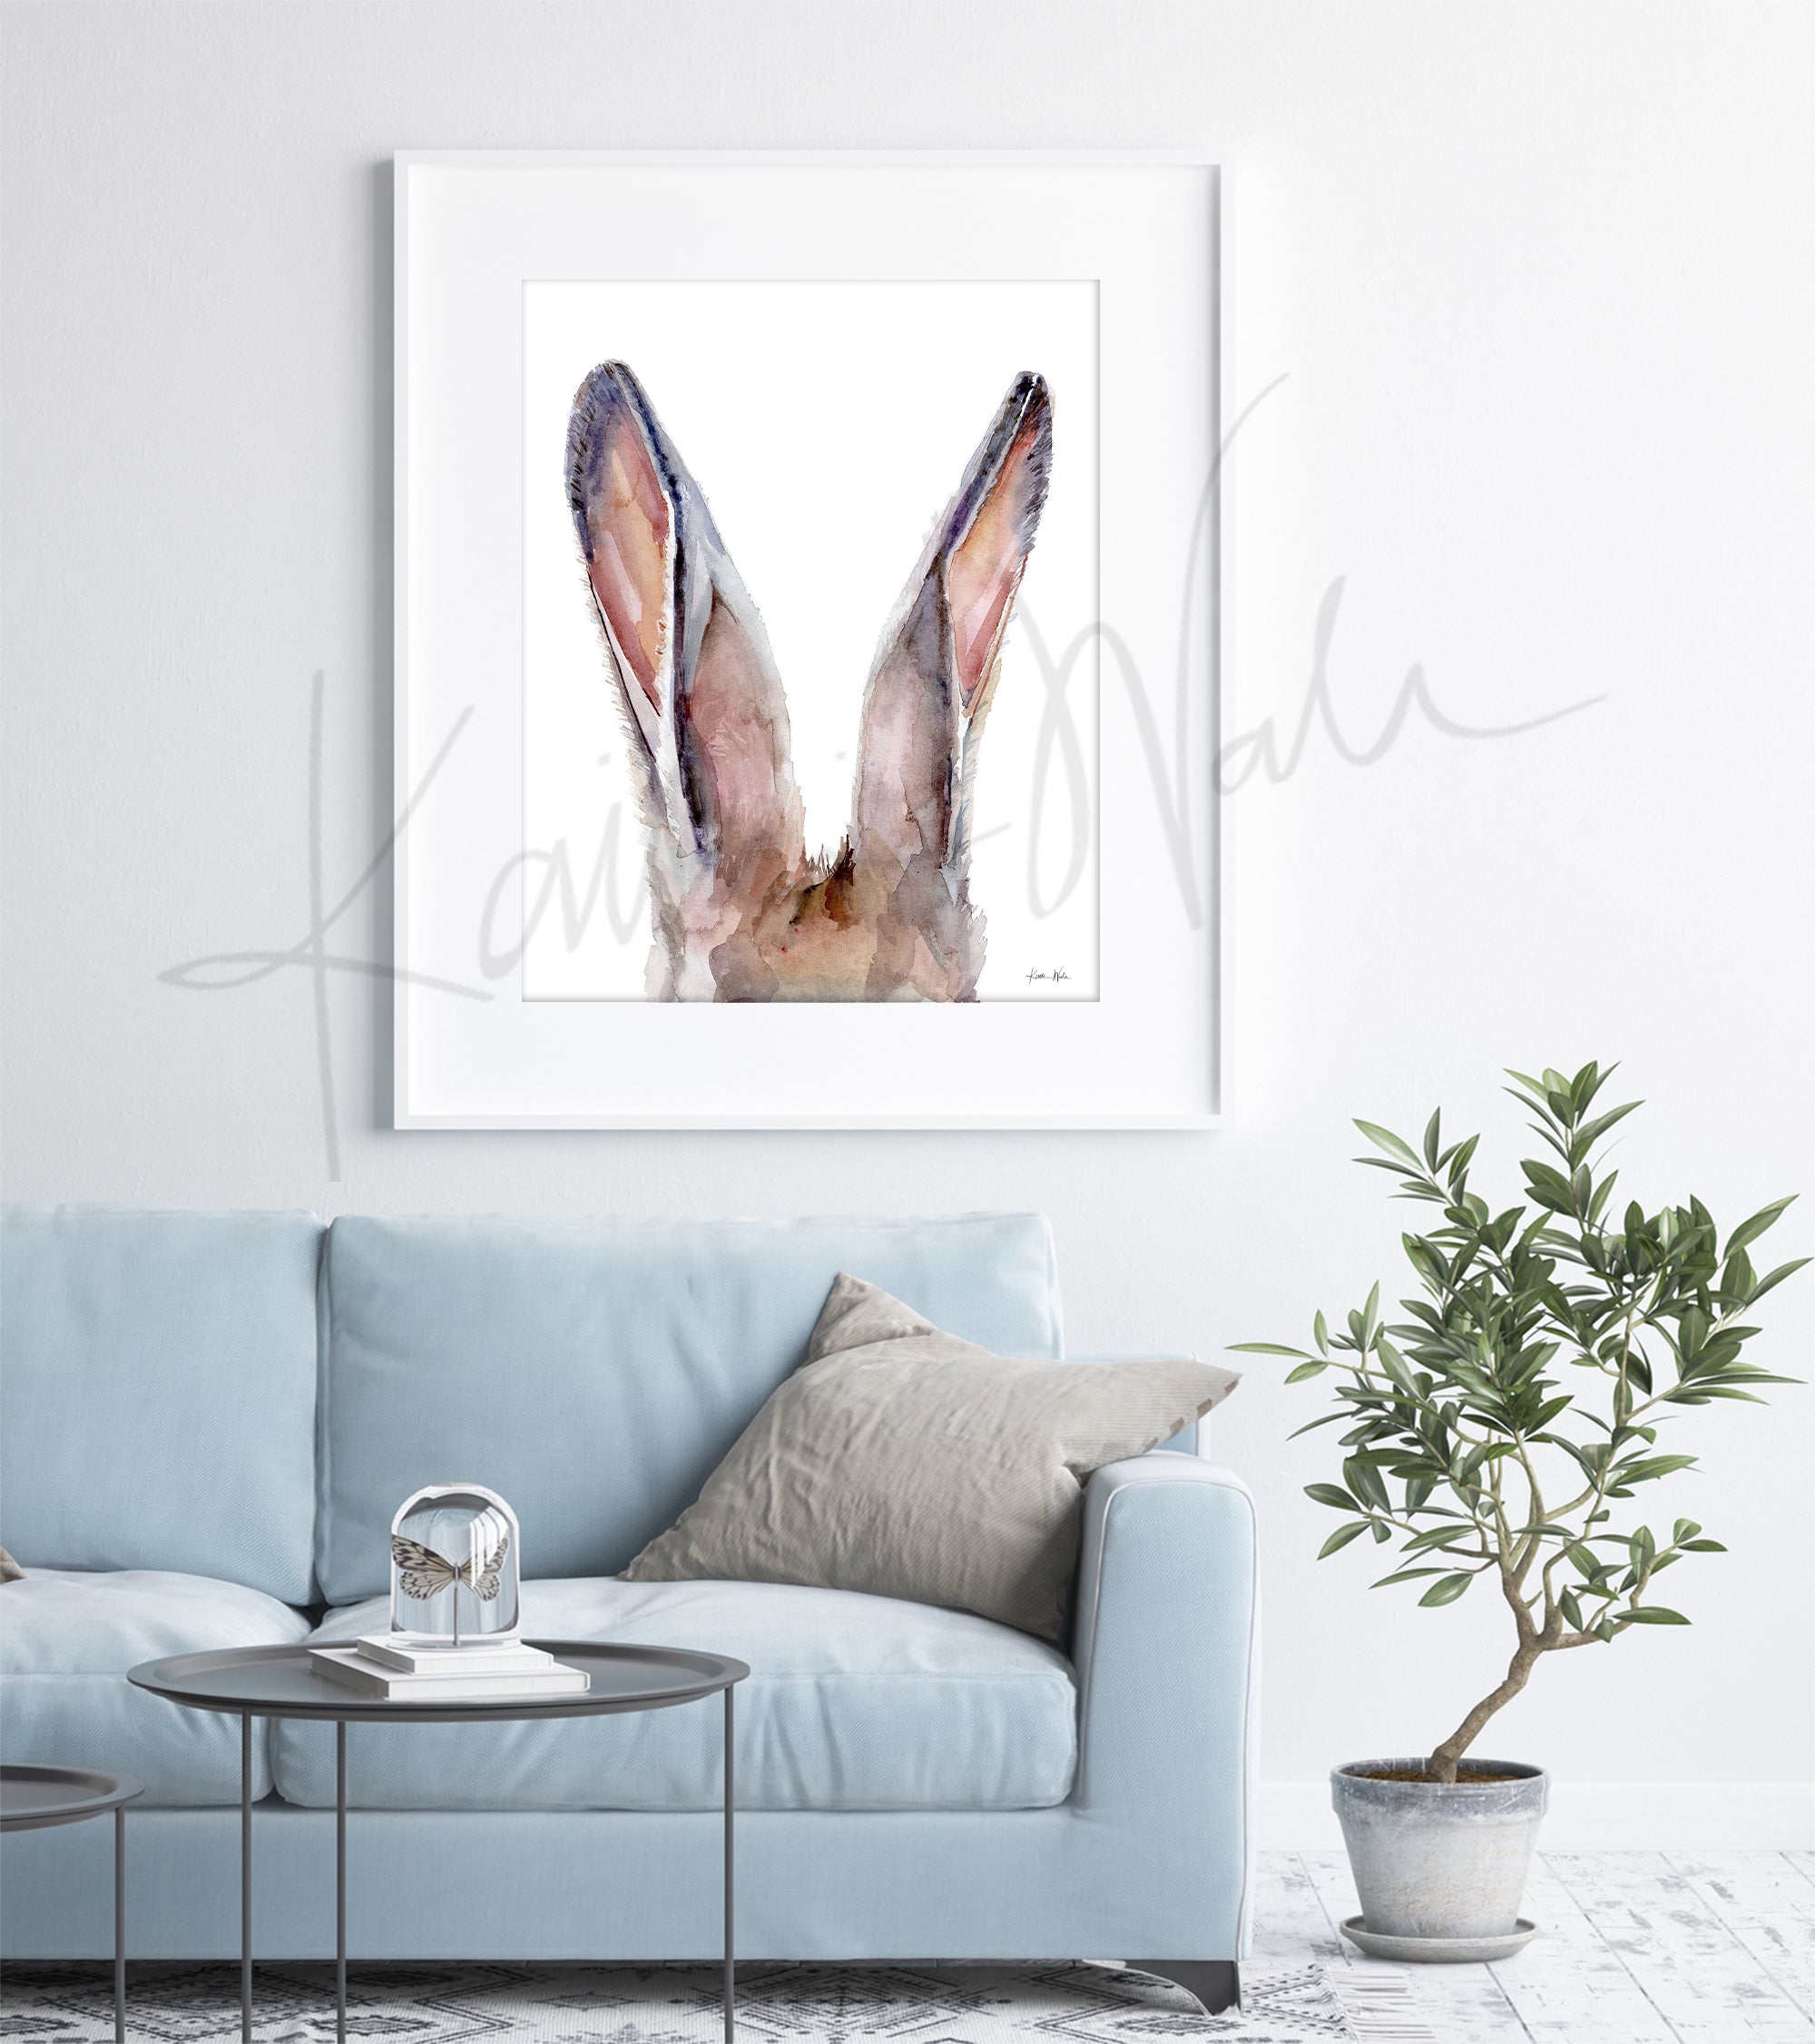 Framed watercolor painting of a zoomed in perspective of rabbit ears in tans, pinks, and browns. The painting is hanging over a blue couch.